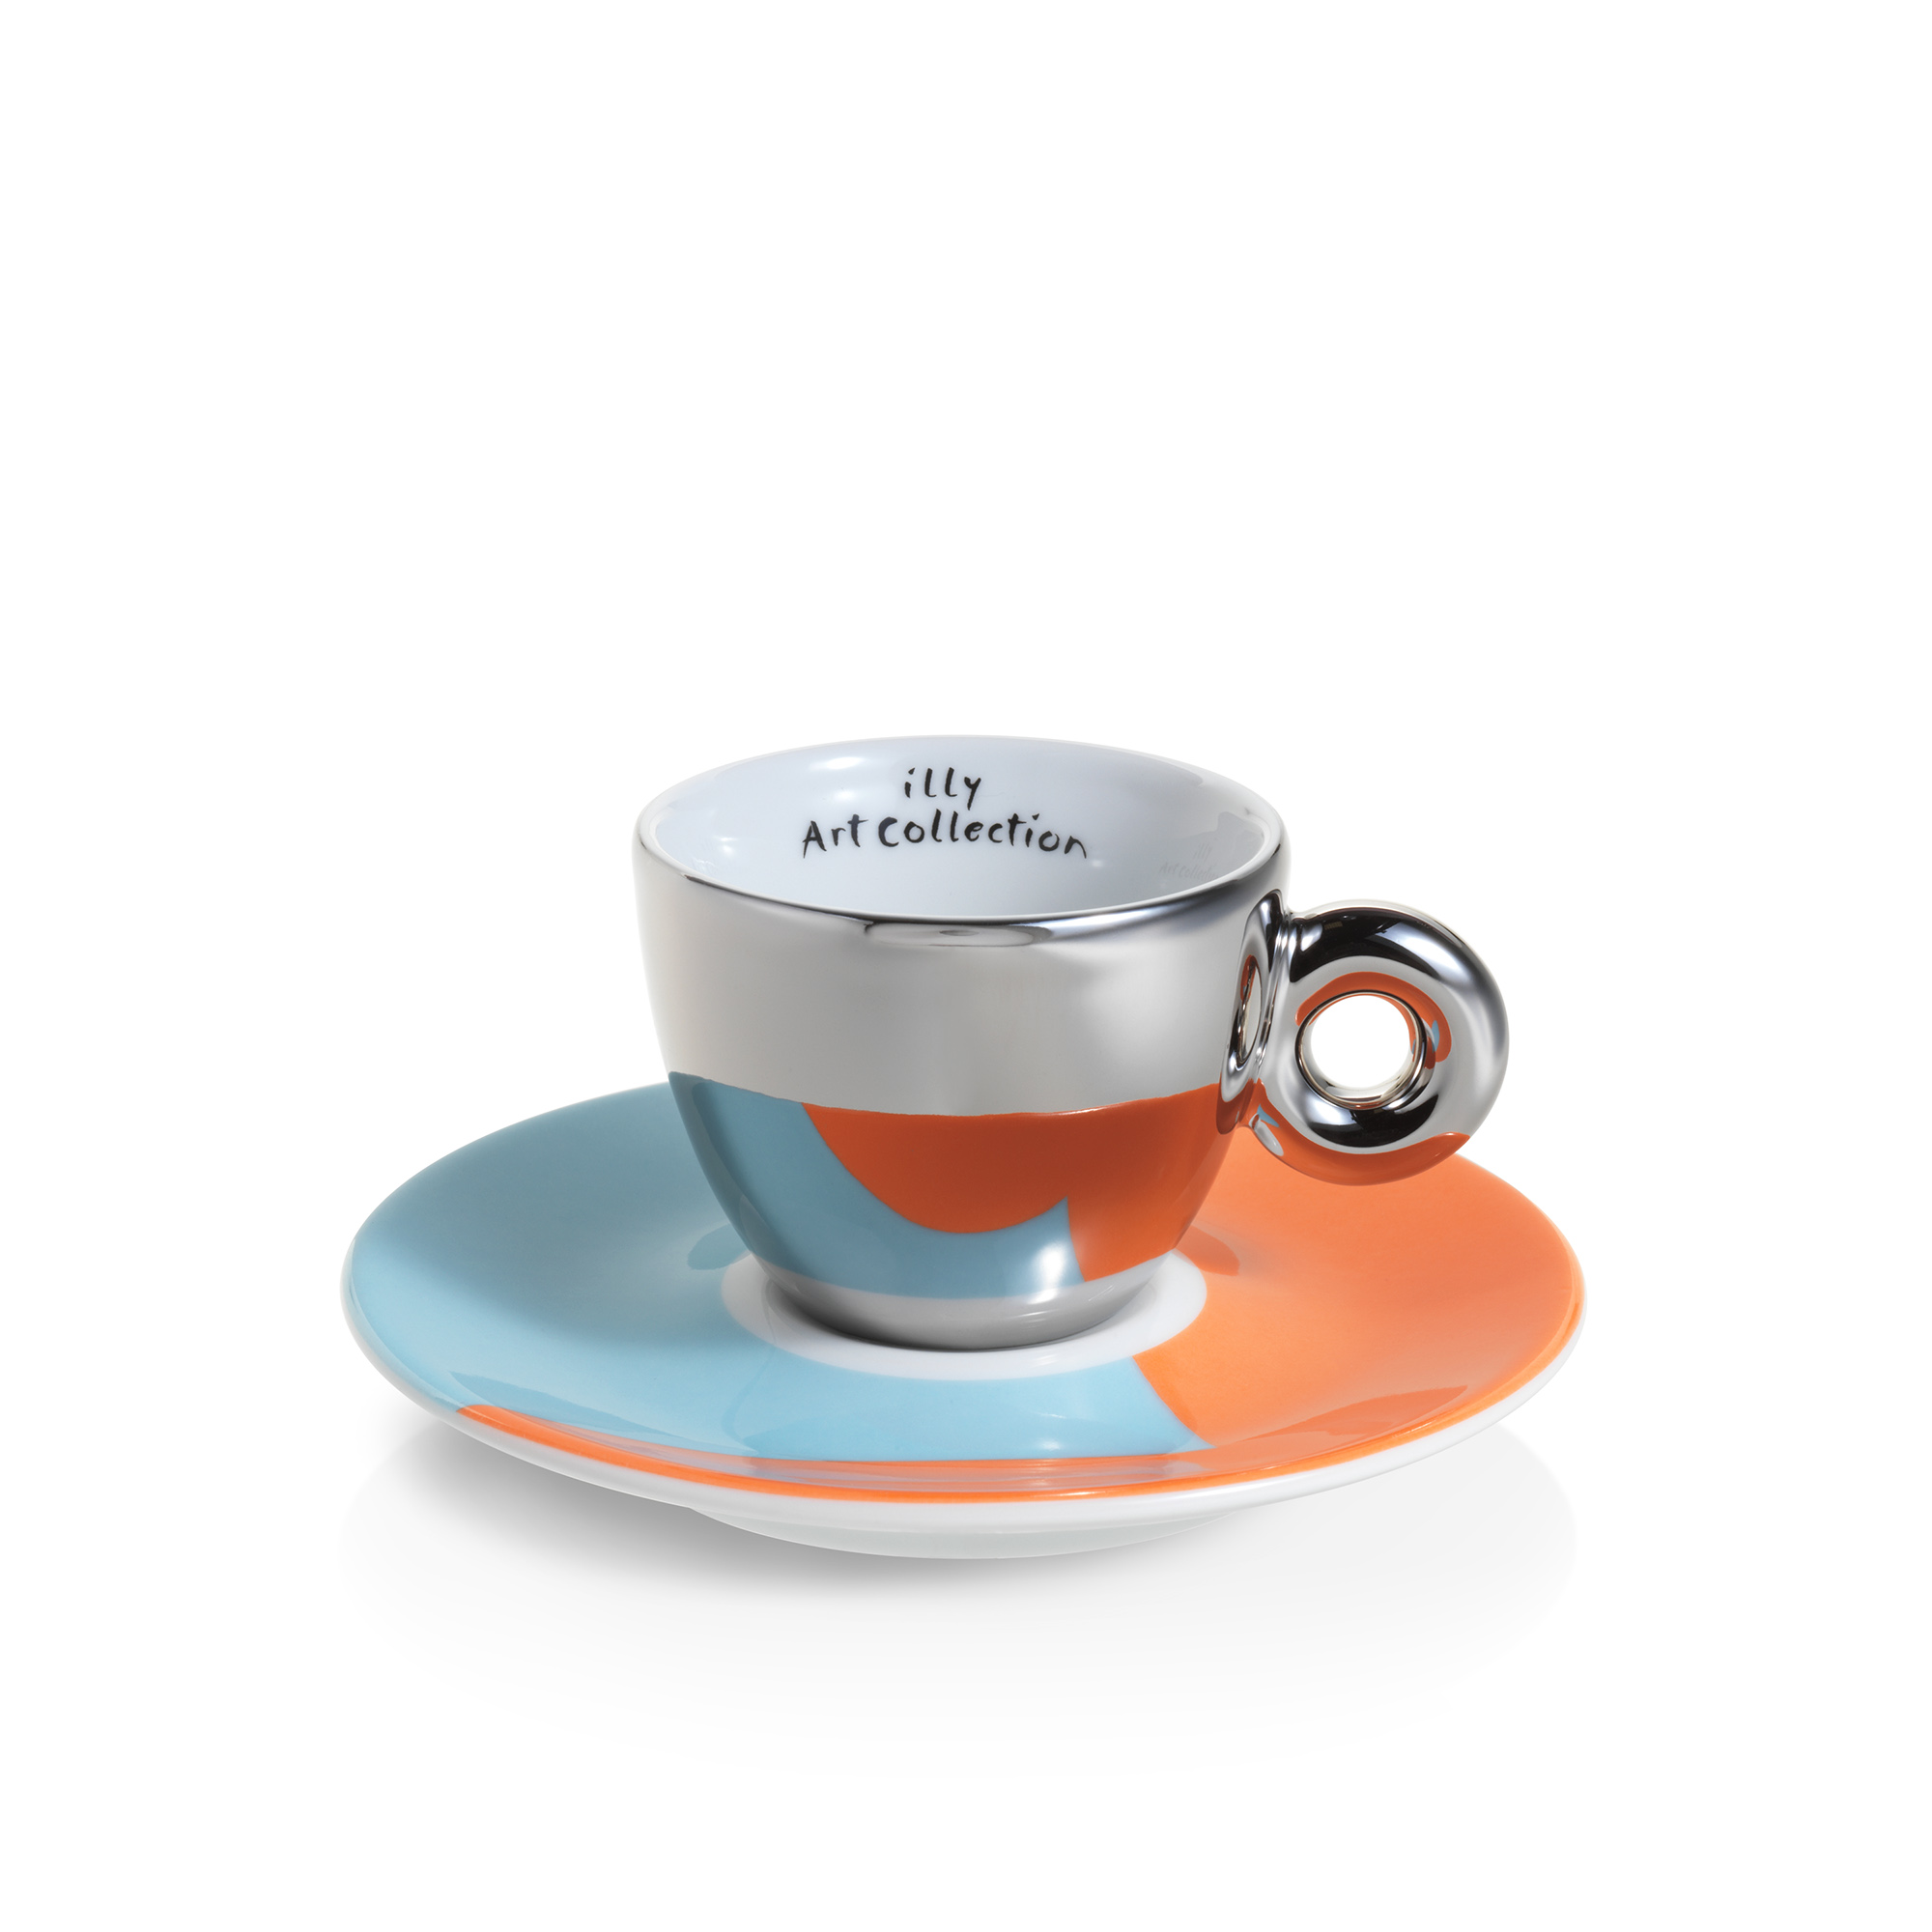 illy Art Collection STEFAN SAGMEISTER Gift Set 2 Espresso Cups, Cups, 02-02-6060